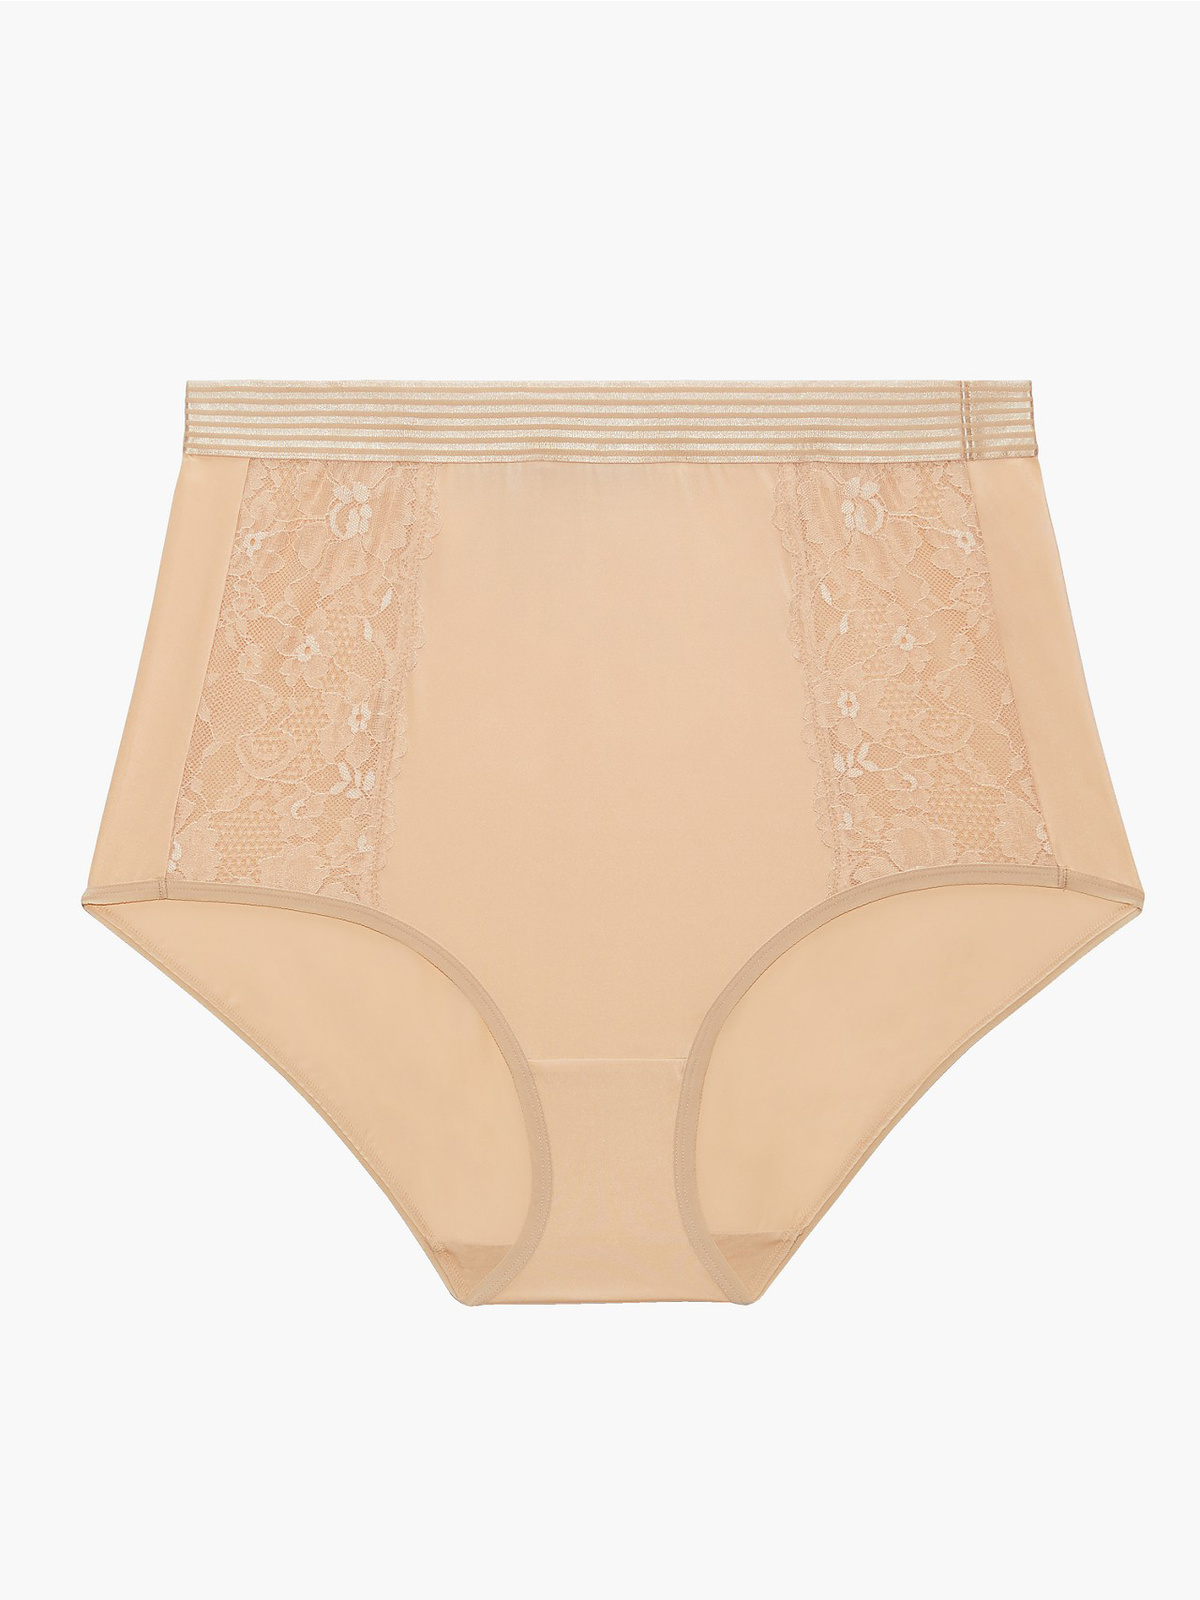 Floral Lace High-Waist Brief in Brown & Nude